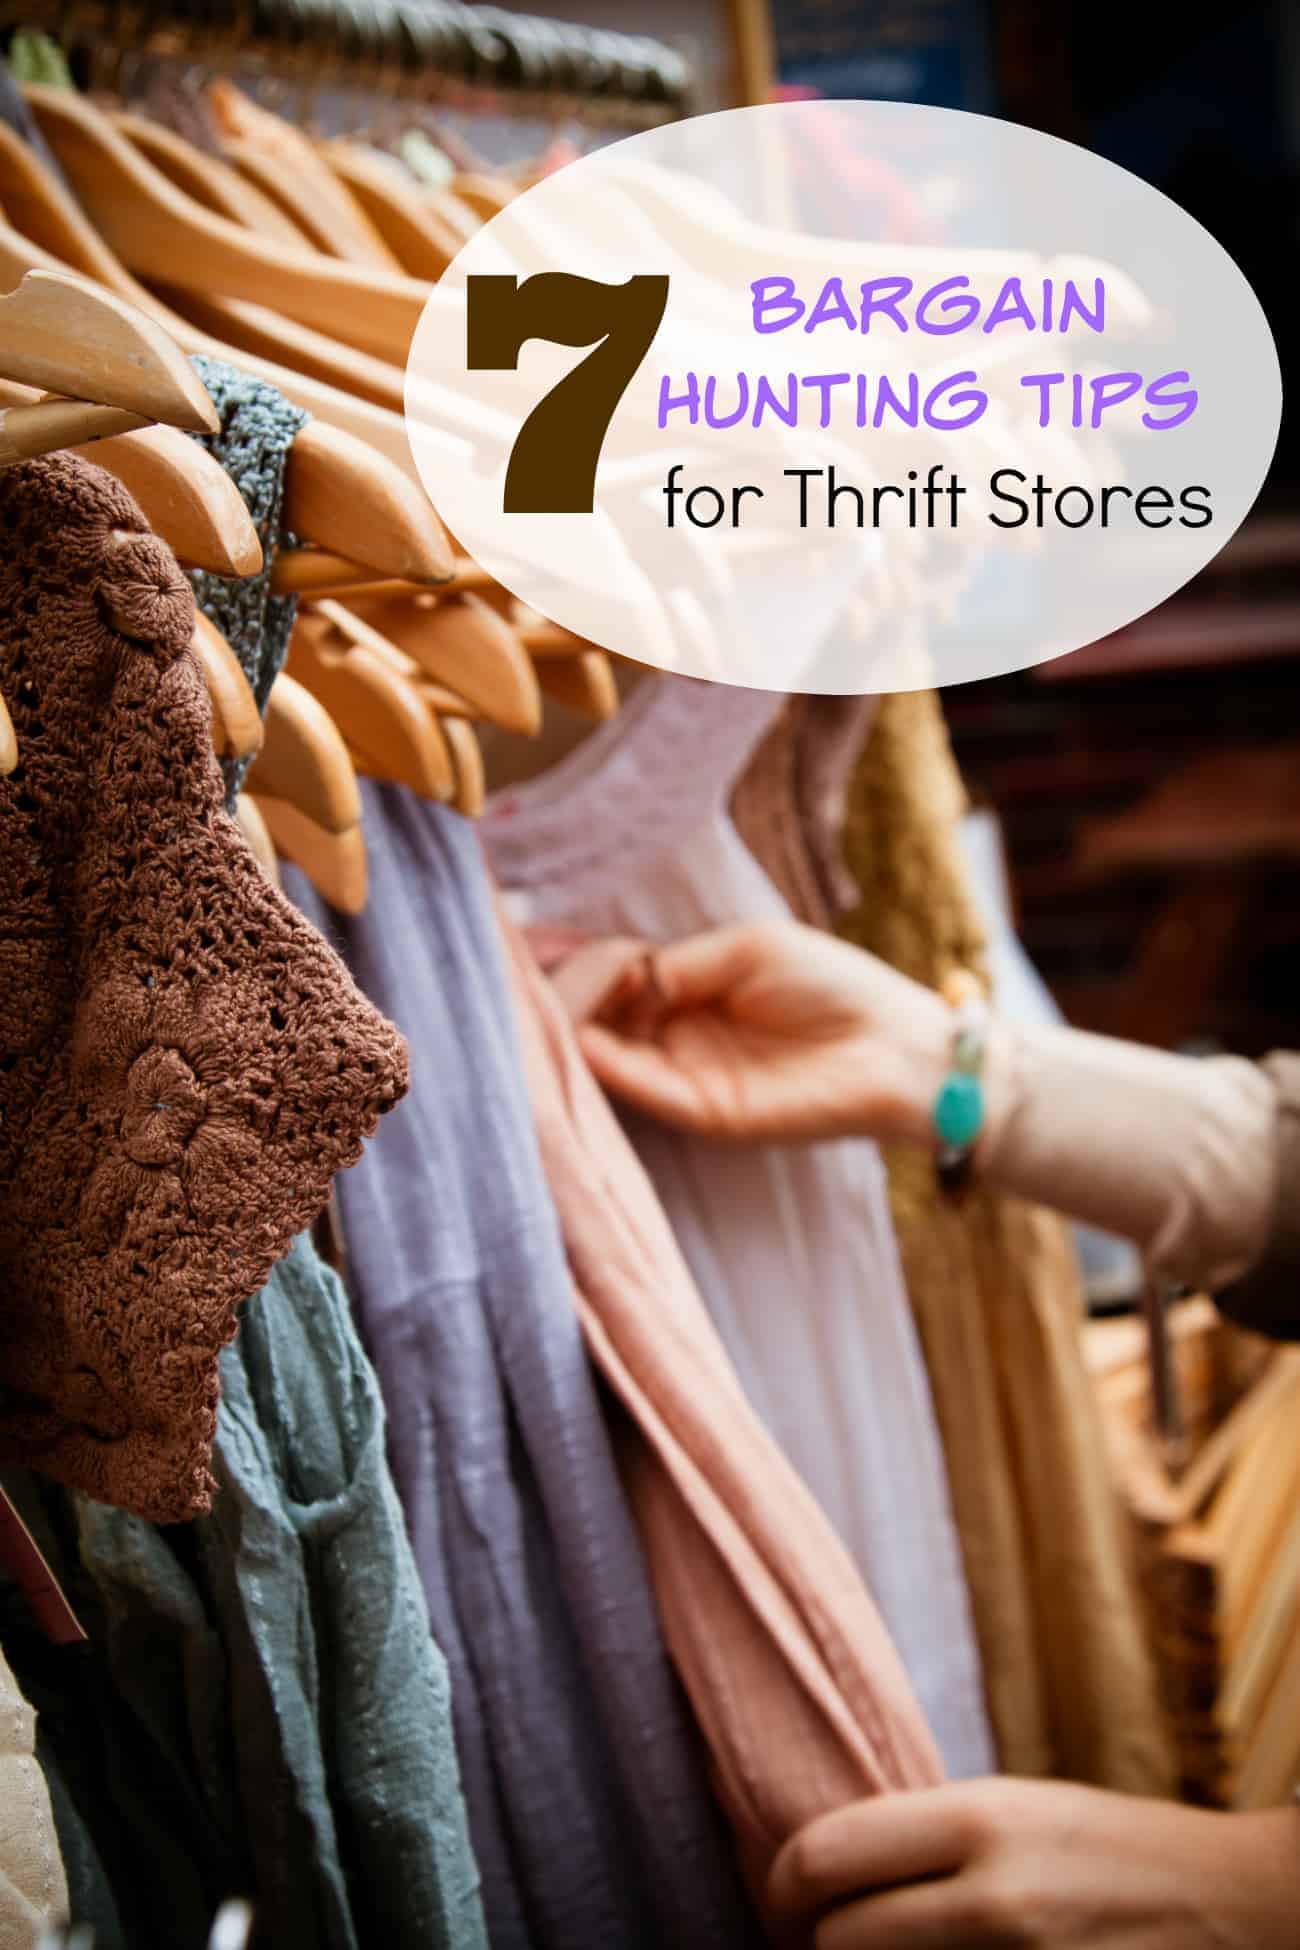 7 Bargain Hunting Tips for Thrift Stores